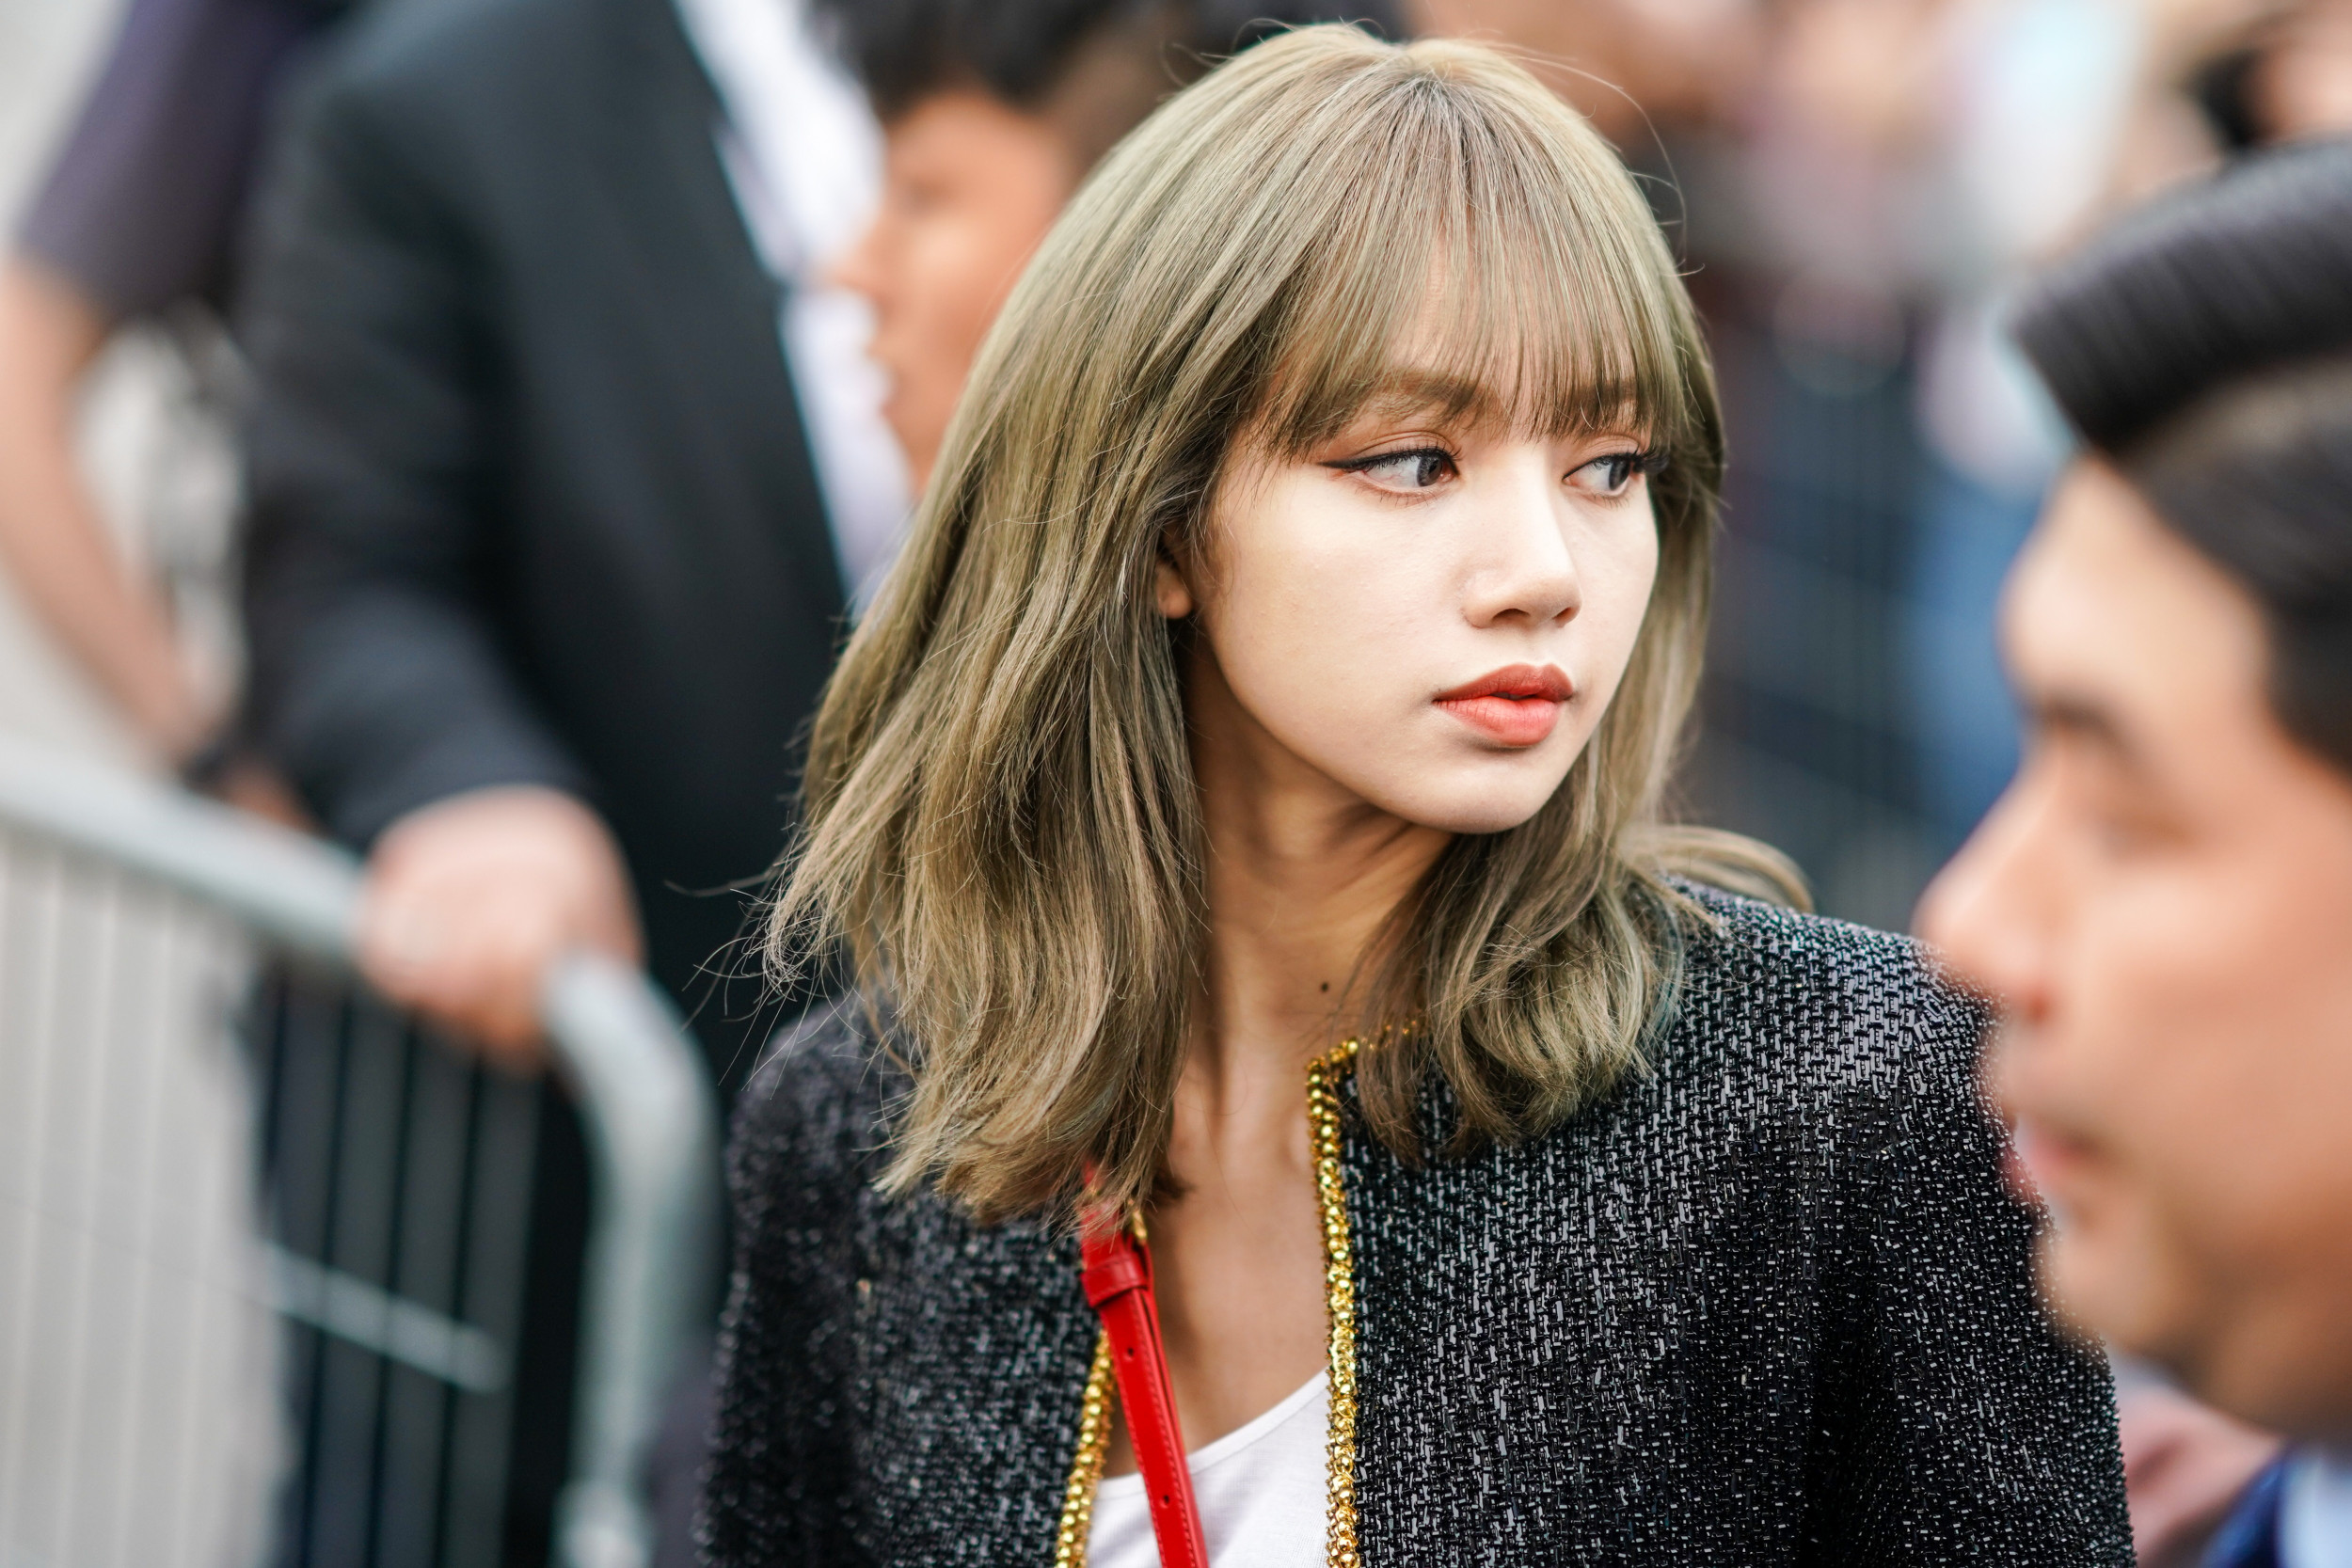 BLACKPINK Lisa: 10 tell-all facts about Lisa of K-pop band BLACKPINK